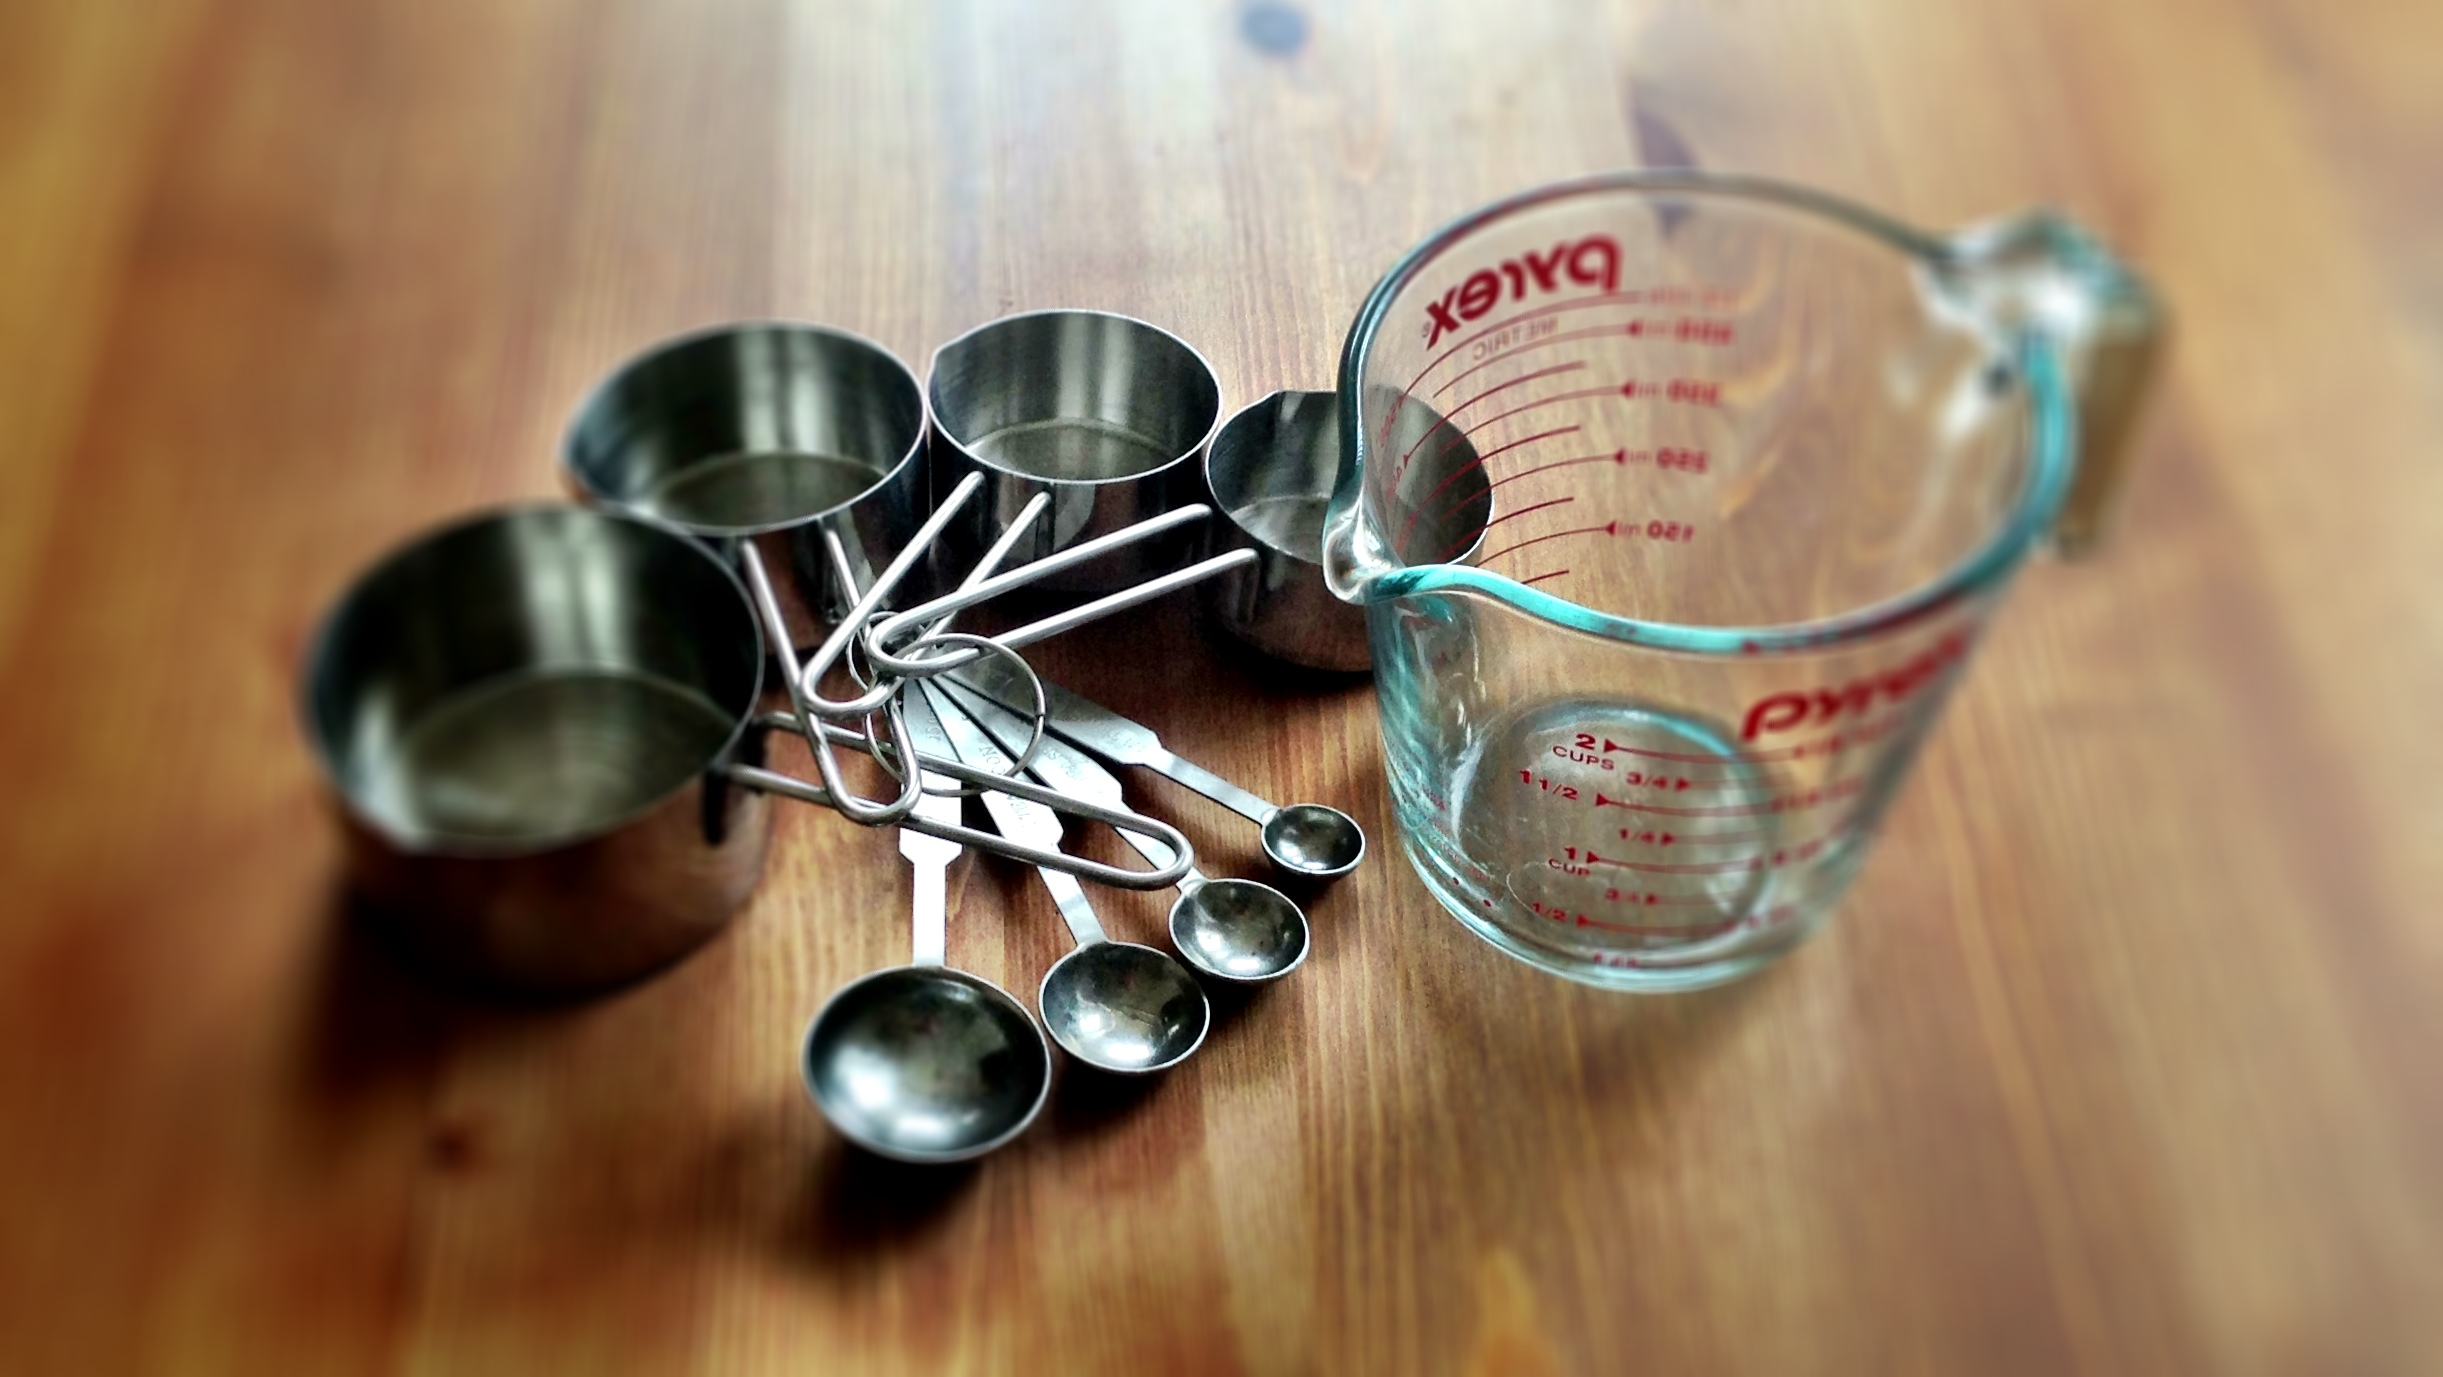 bring-the-science-essential-analytical-tools-for-your-kitchen